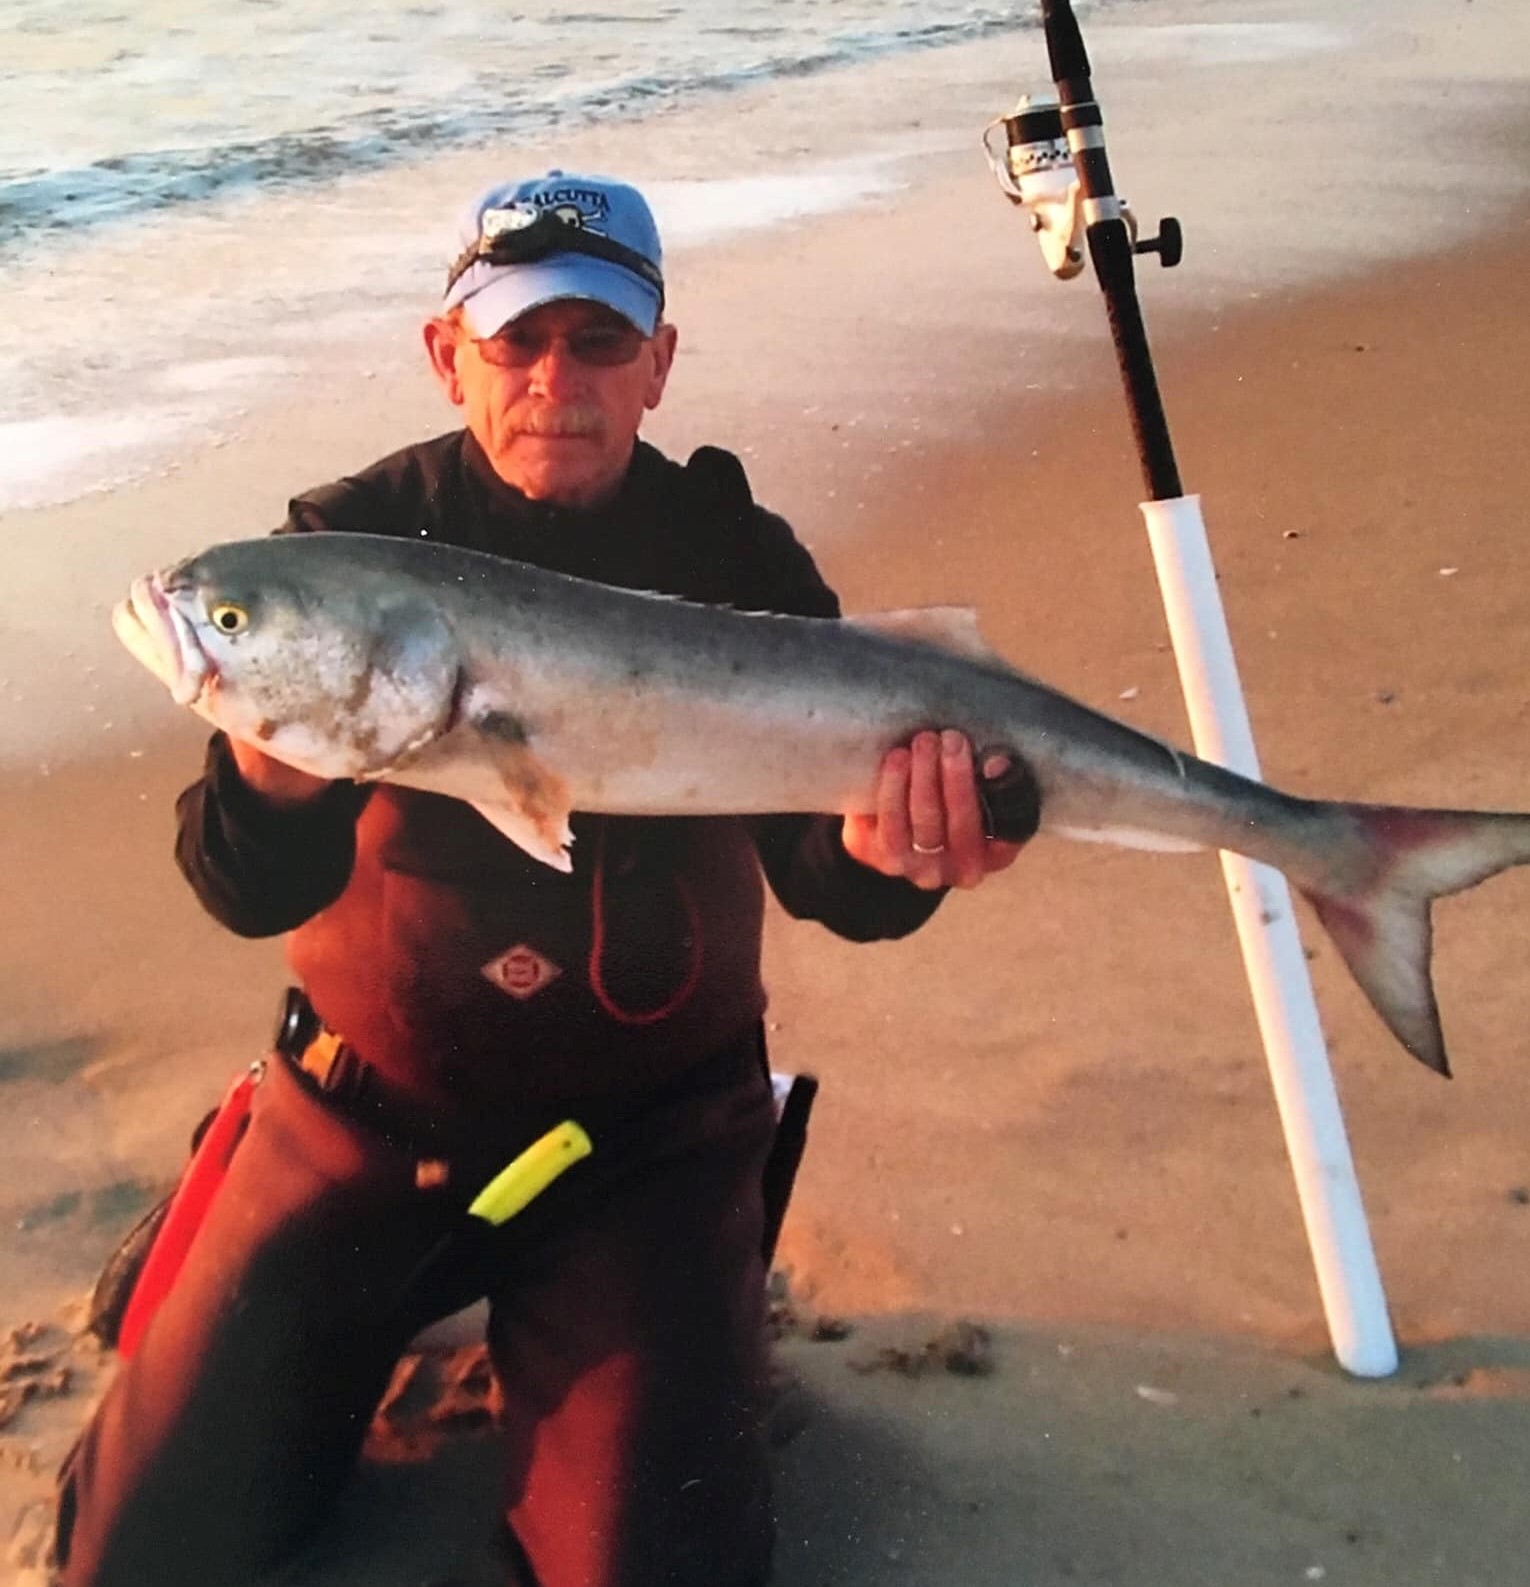 Surfcasting basics - gear selection - The Fishing Website